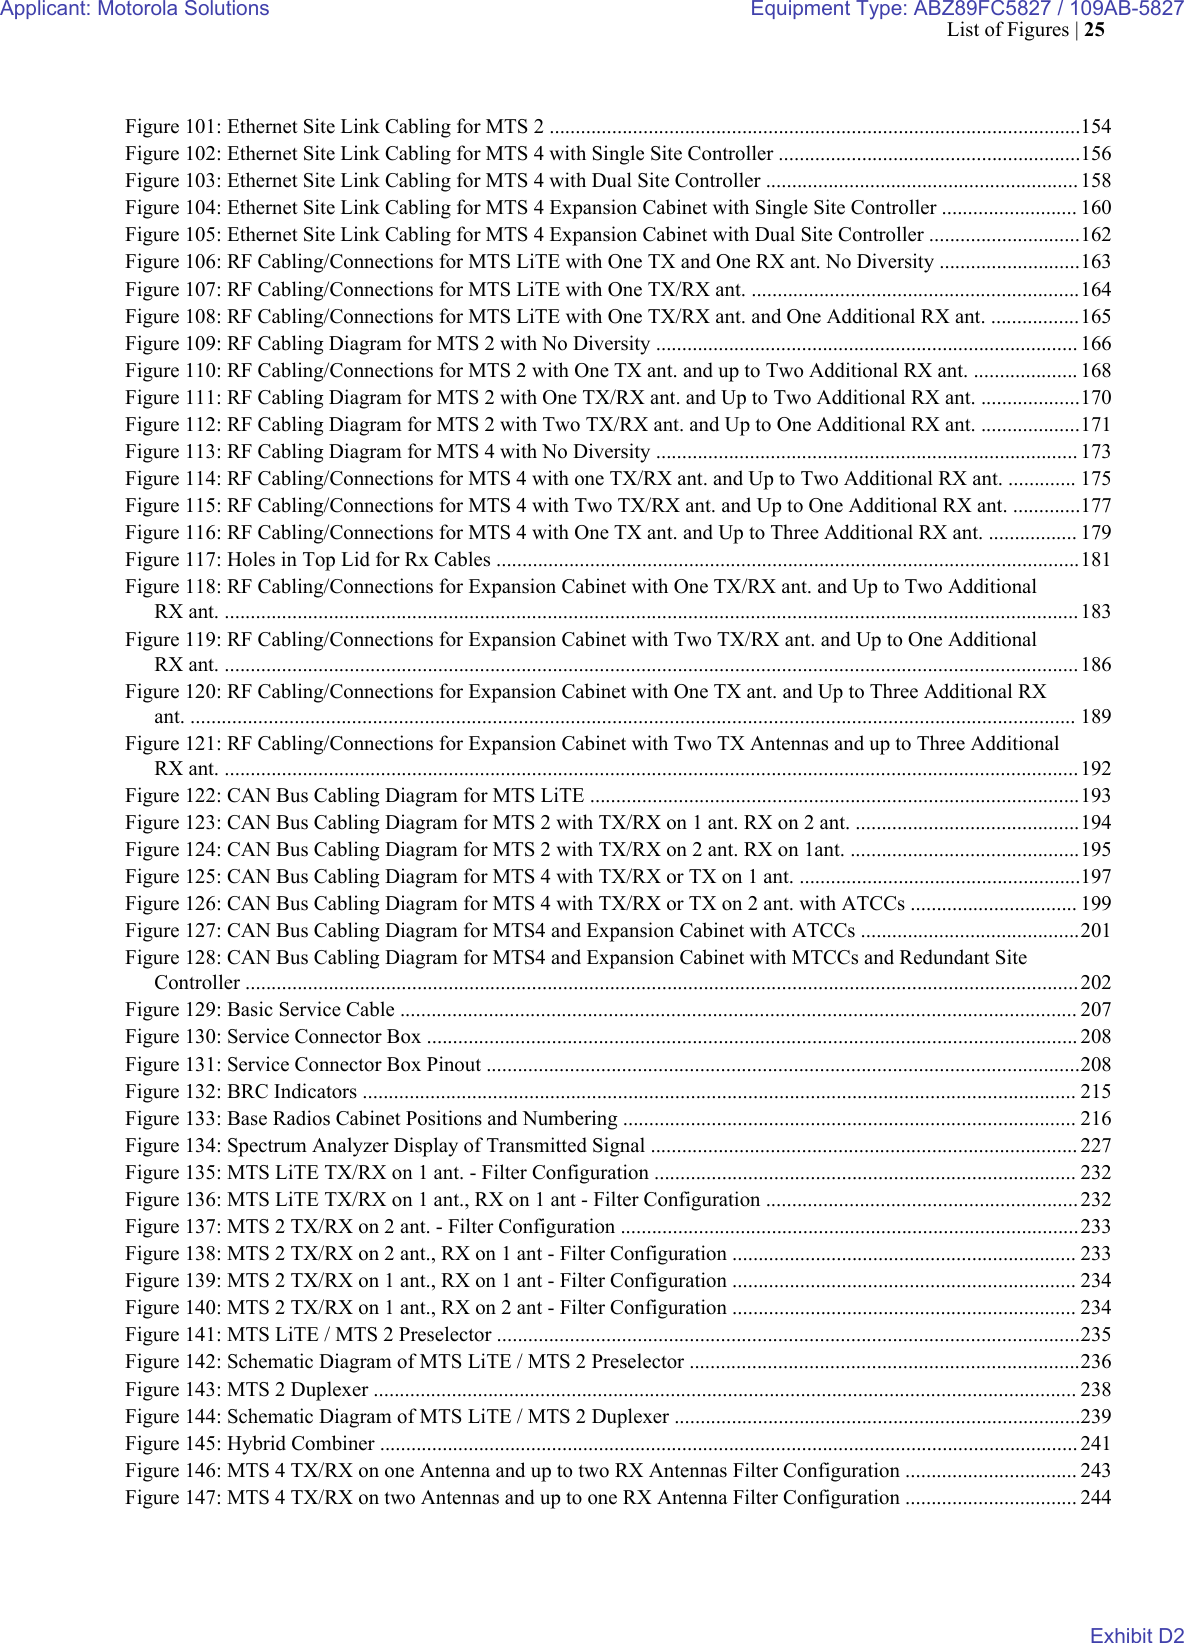 Page 28 of Motorola Solutions 89FC5827 Non Broadcast Transmitter User Manual Summit BR 800 Tx FCC Filing 3